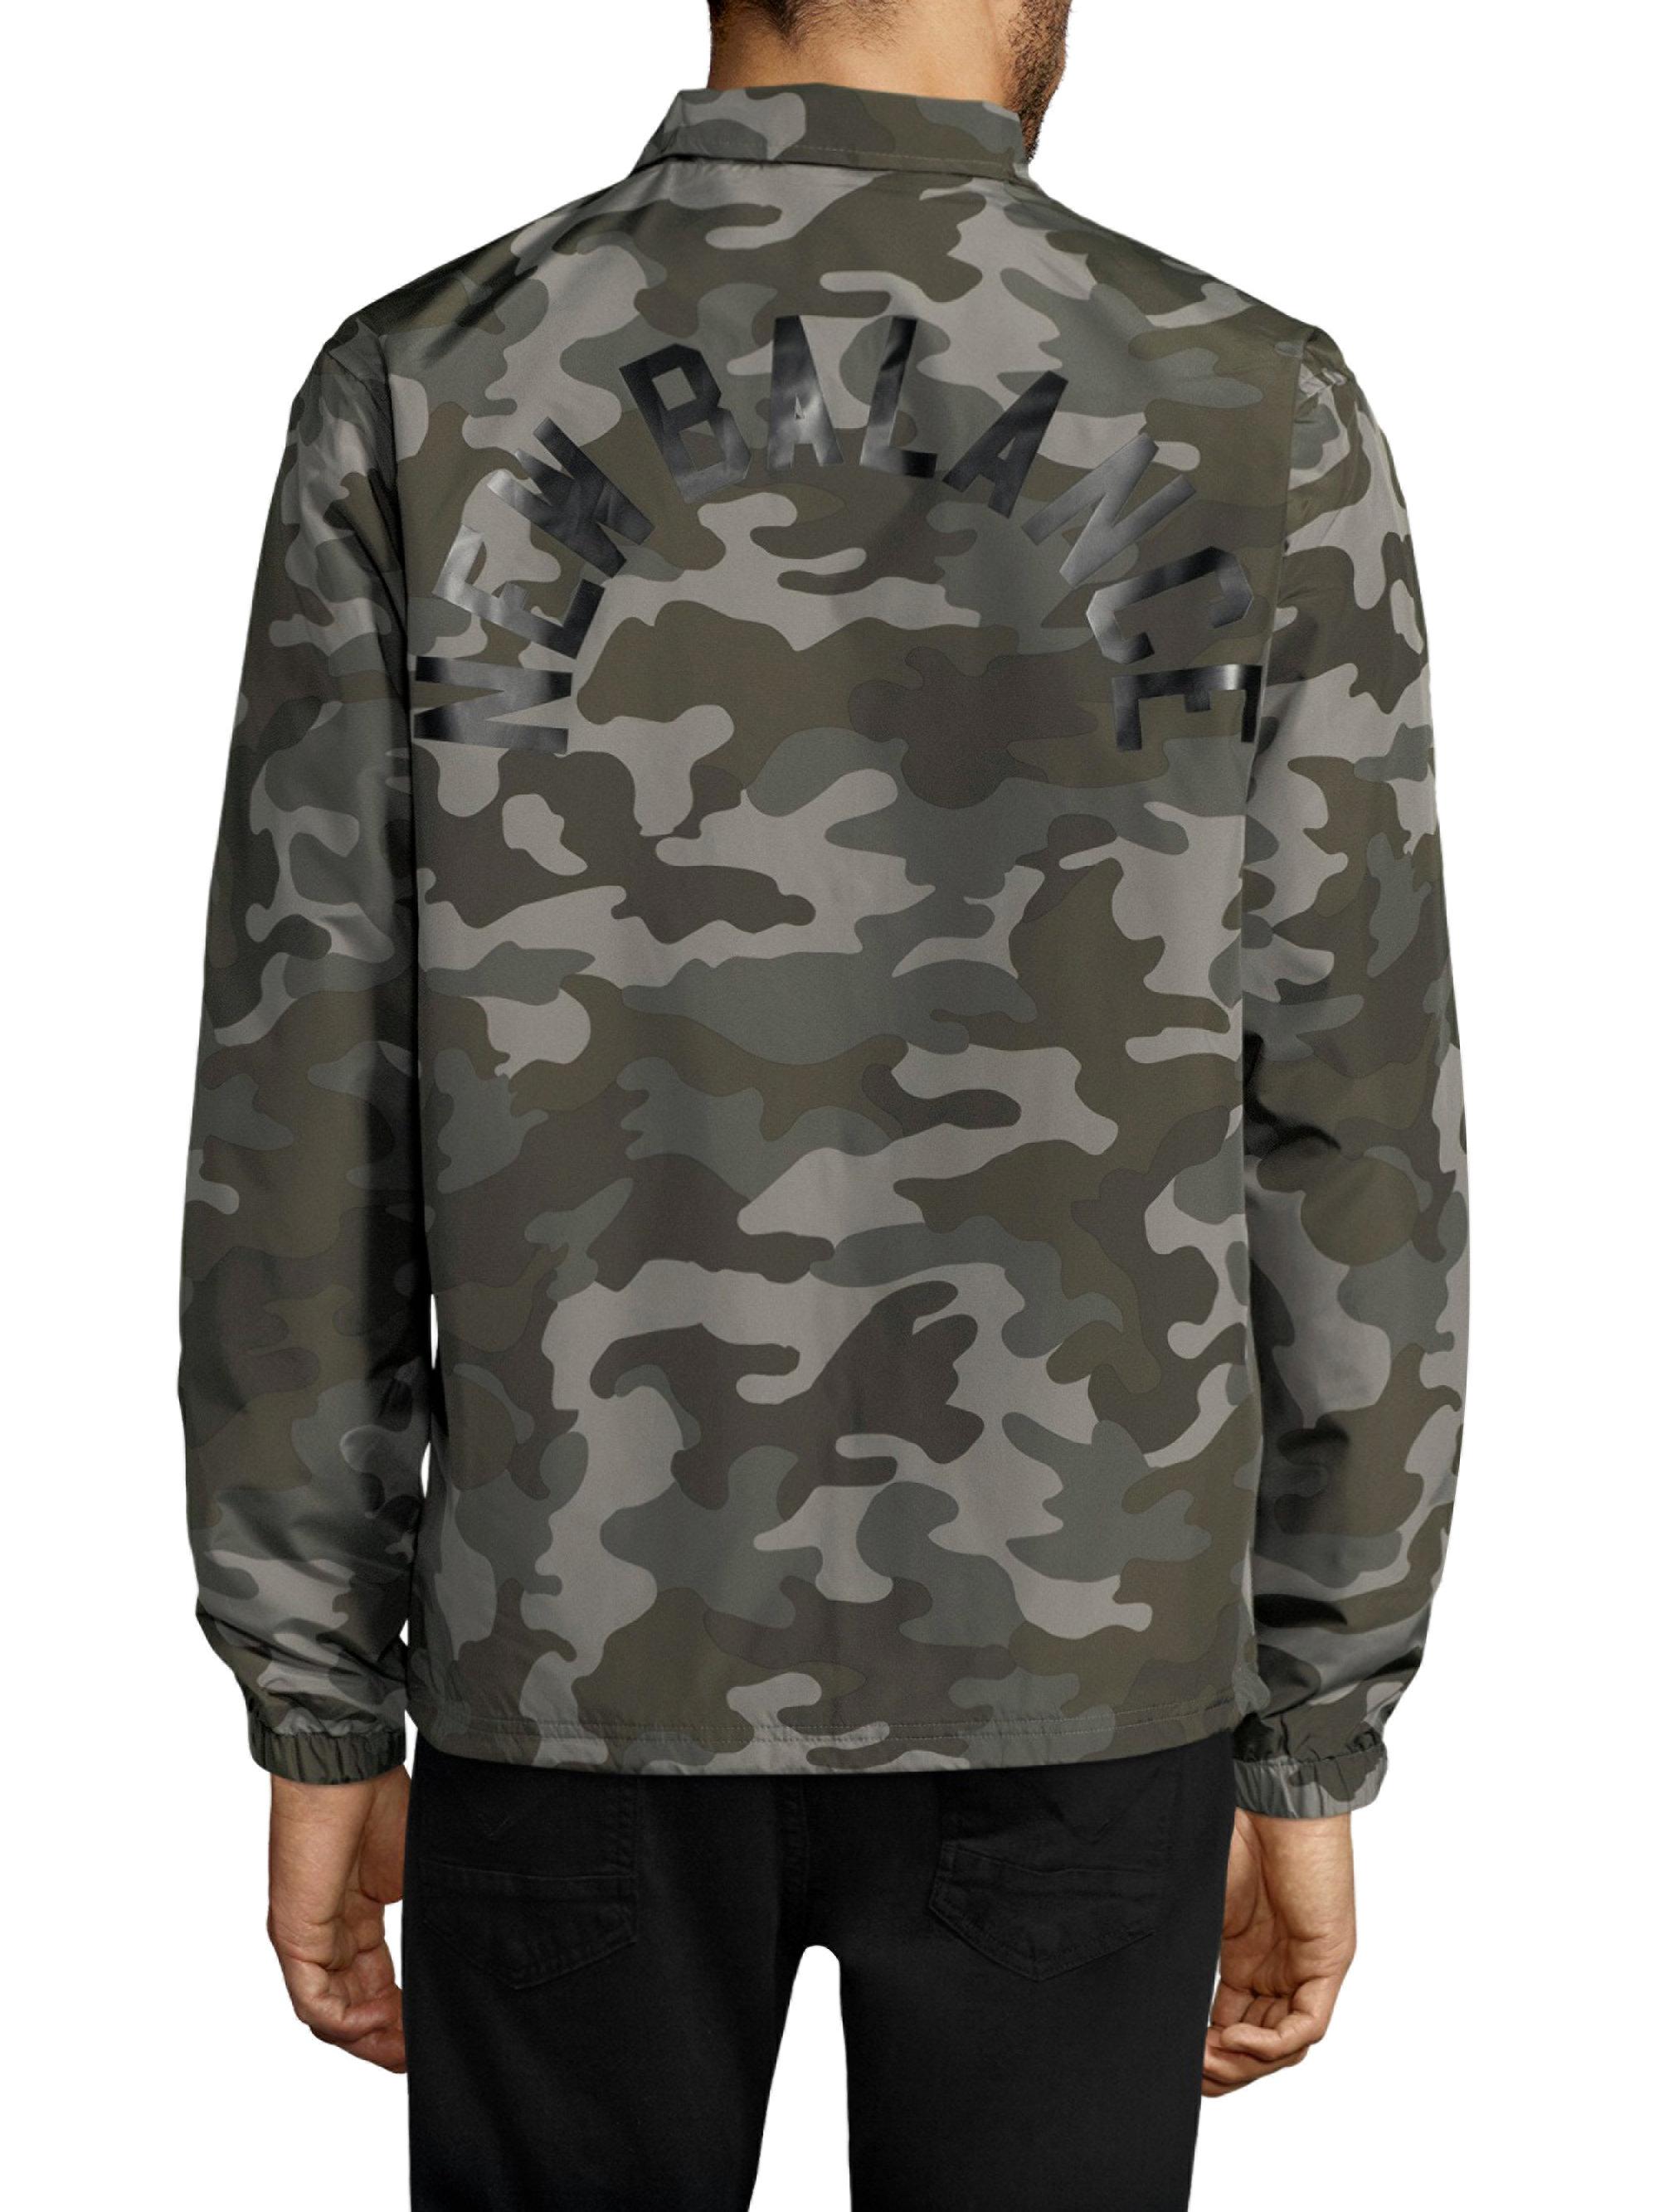 New Balance Synthetic Nylon Camo Jacket in Green for Men - Lyst